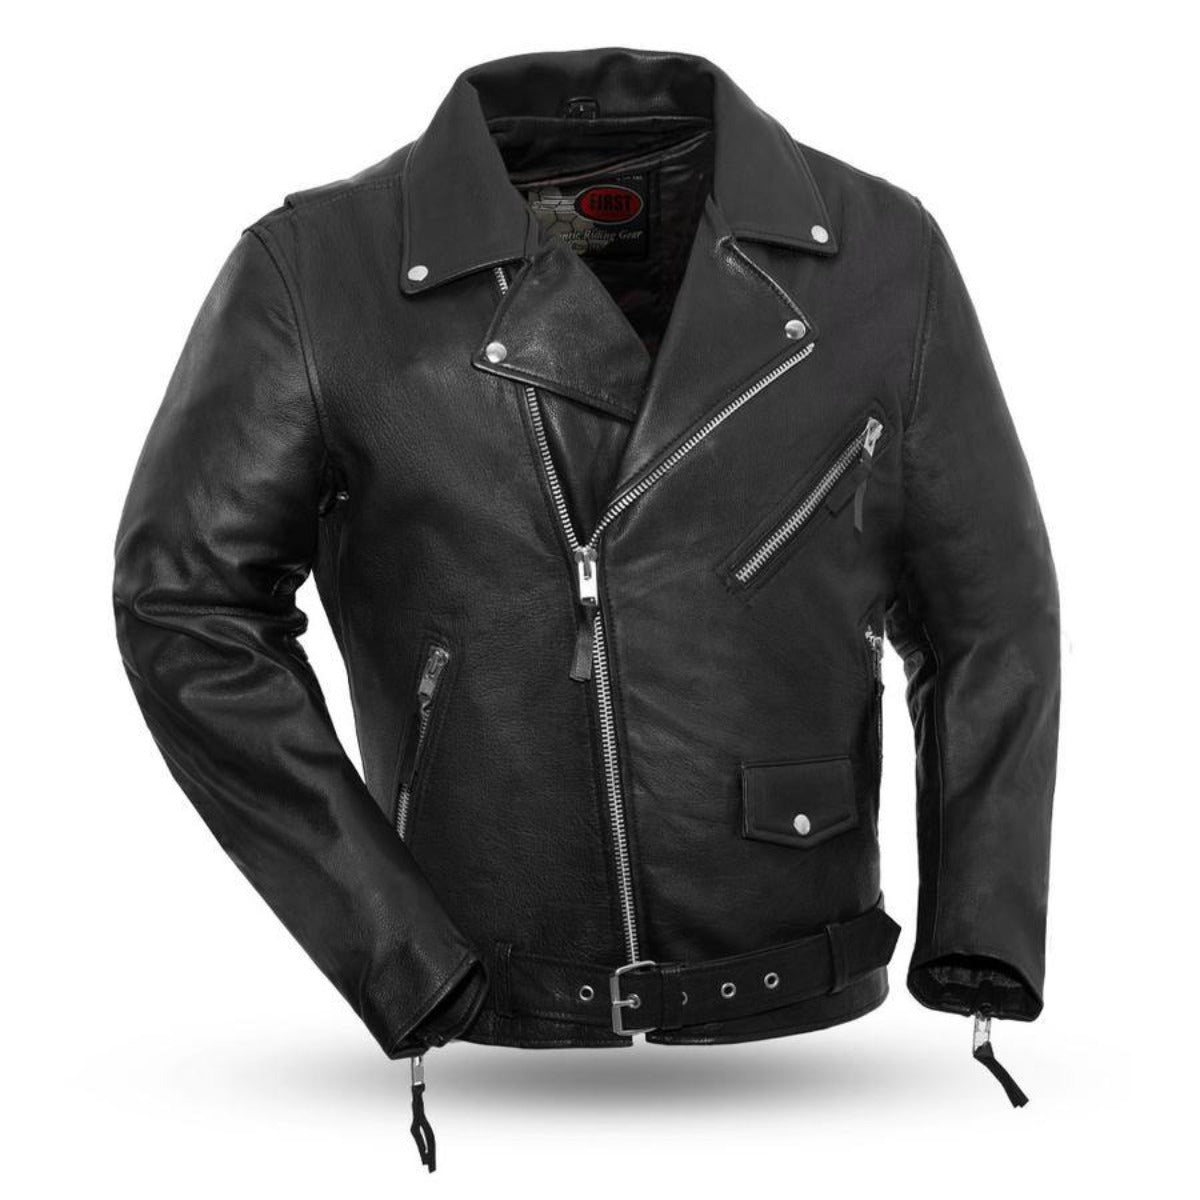 First Genuine Leather, Jackets & Coats, Motorcycle Jacket W Airbrushed  Eagle And Has Zipper Extender